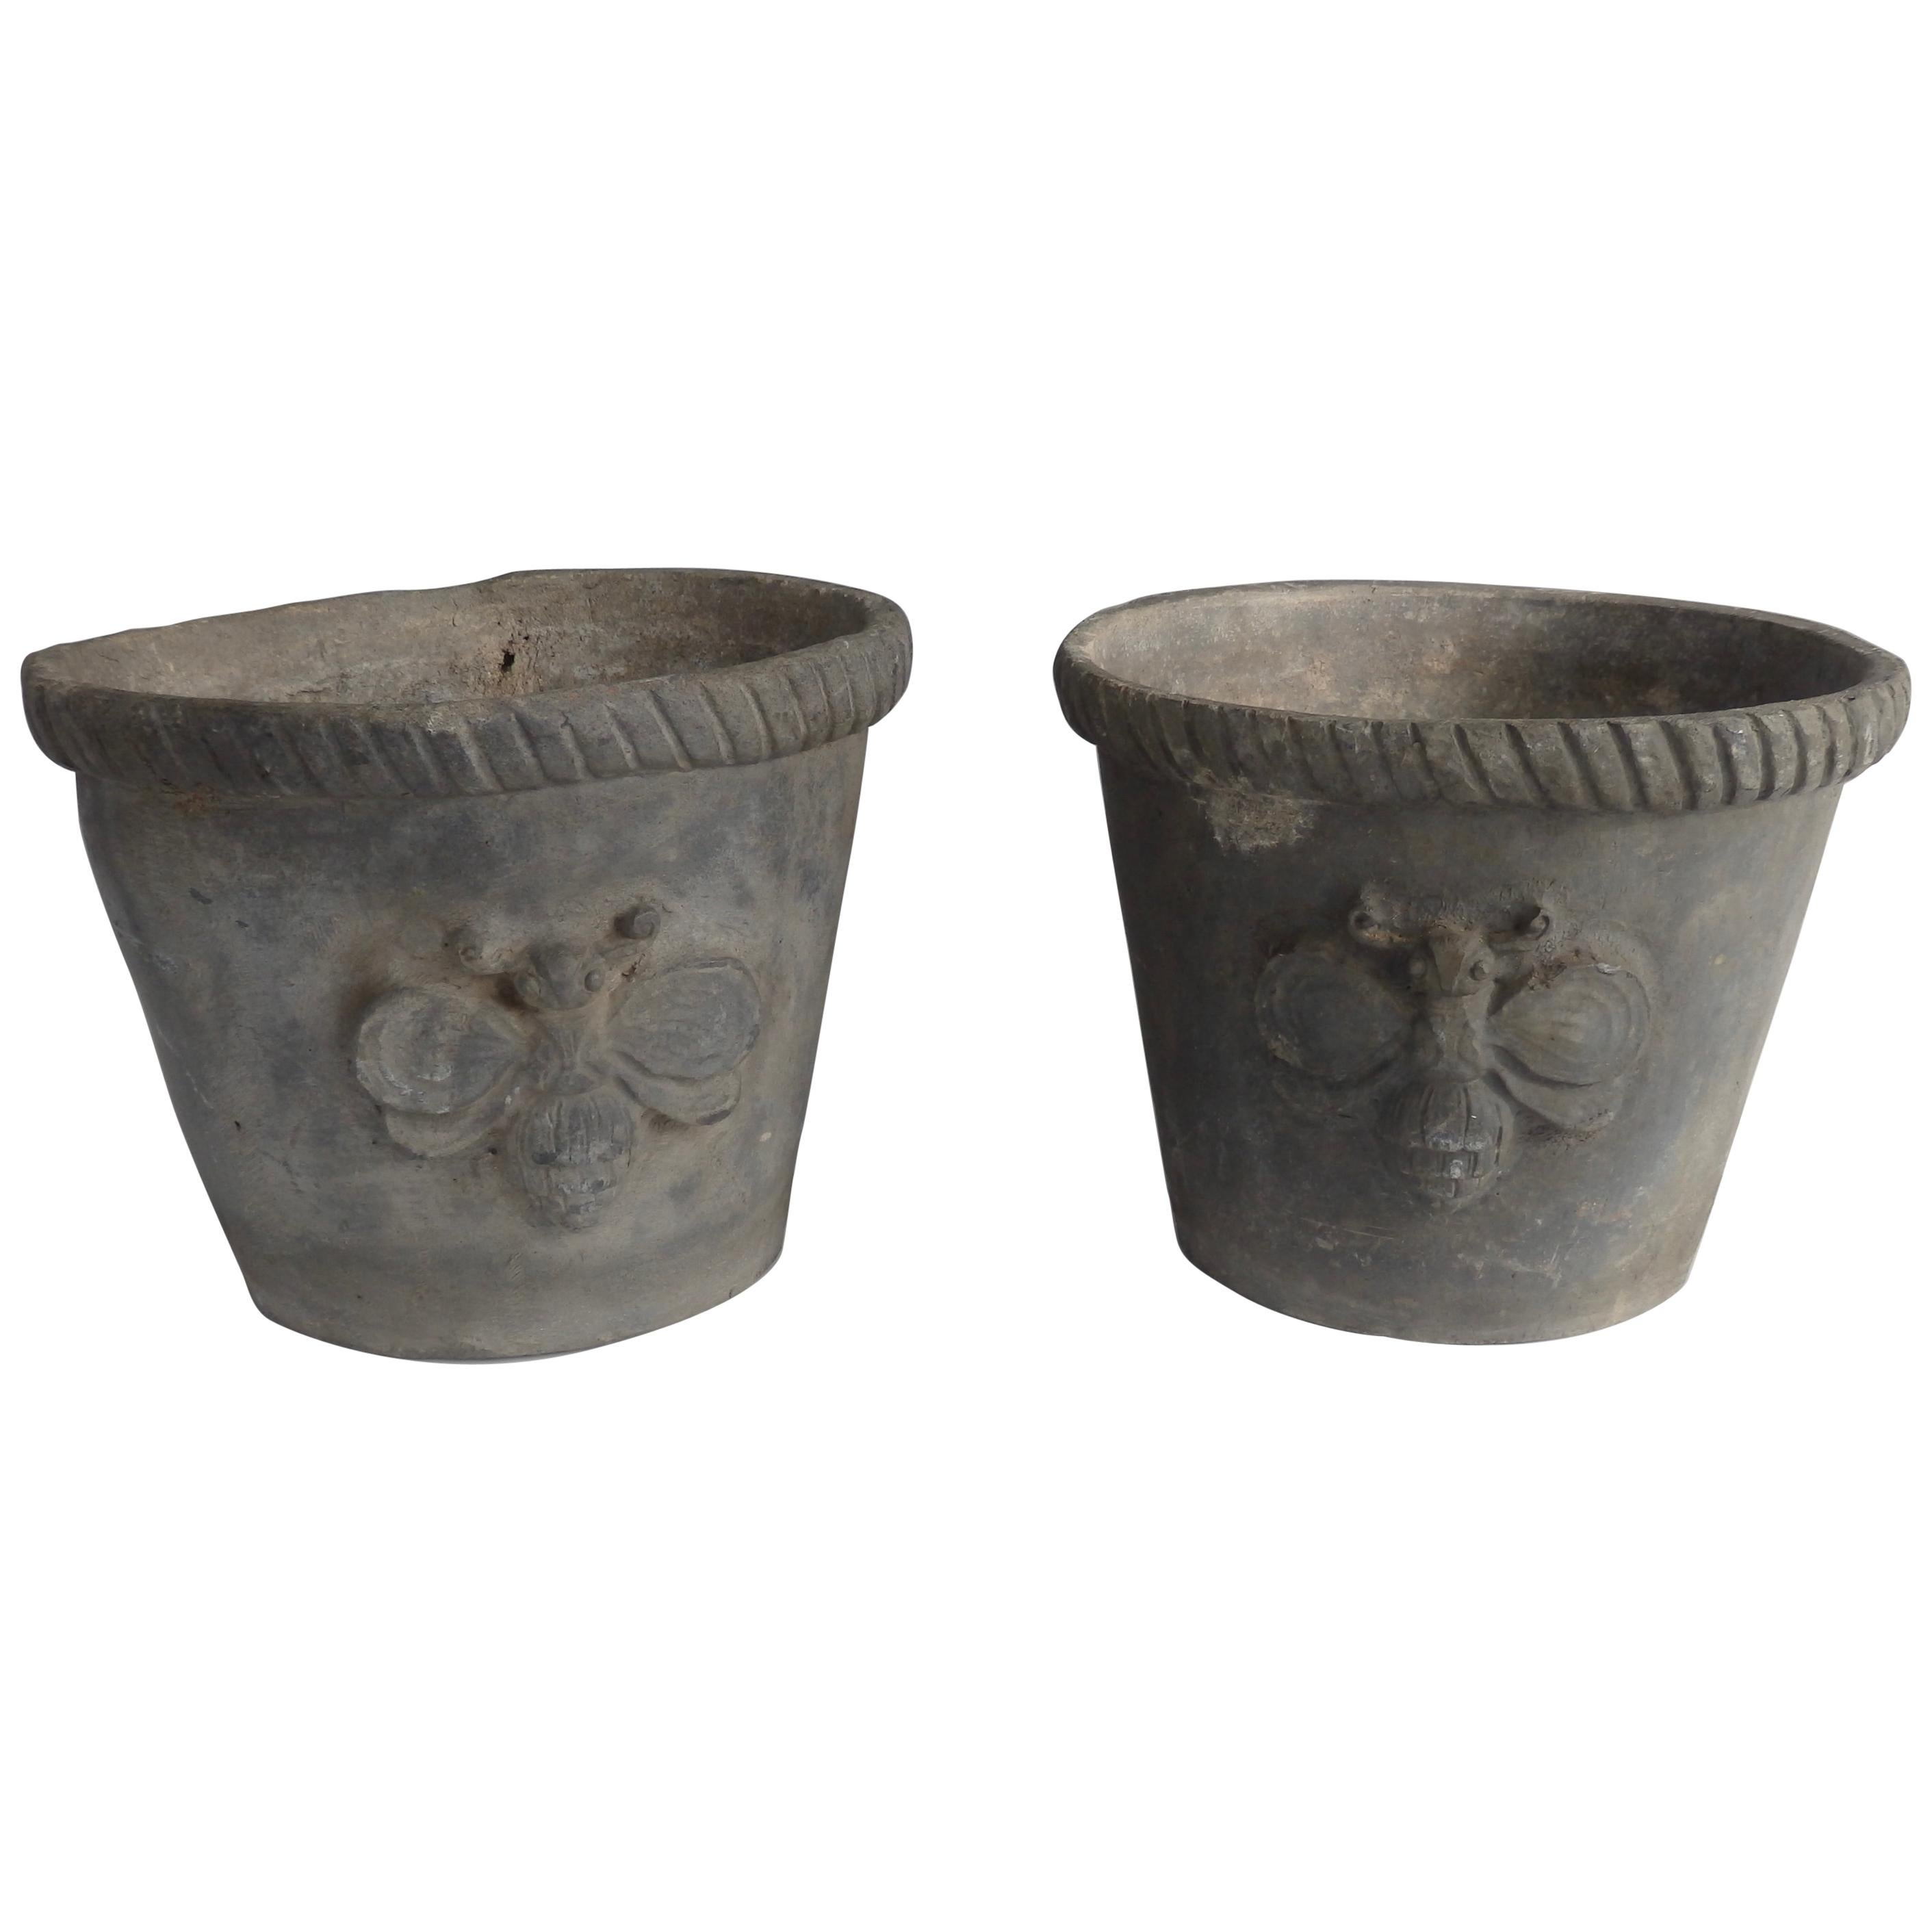 Pair of Antique French Lead Planter Pots with Bumblebee Design